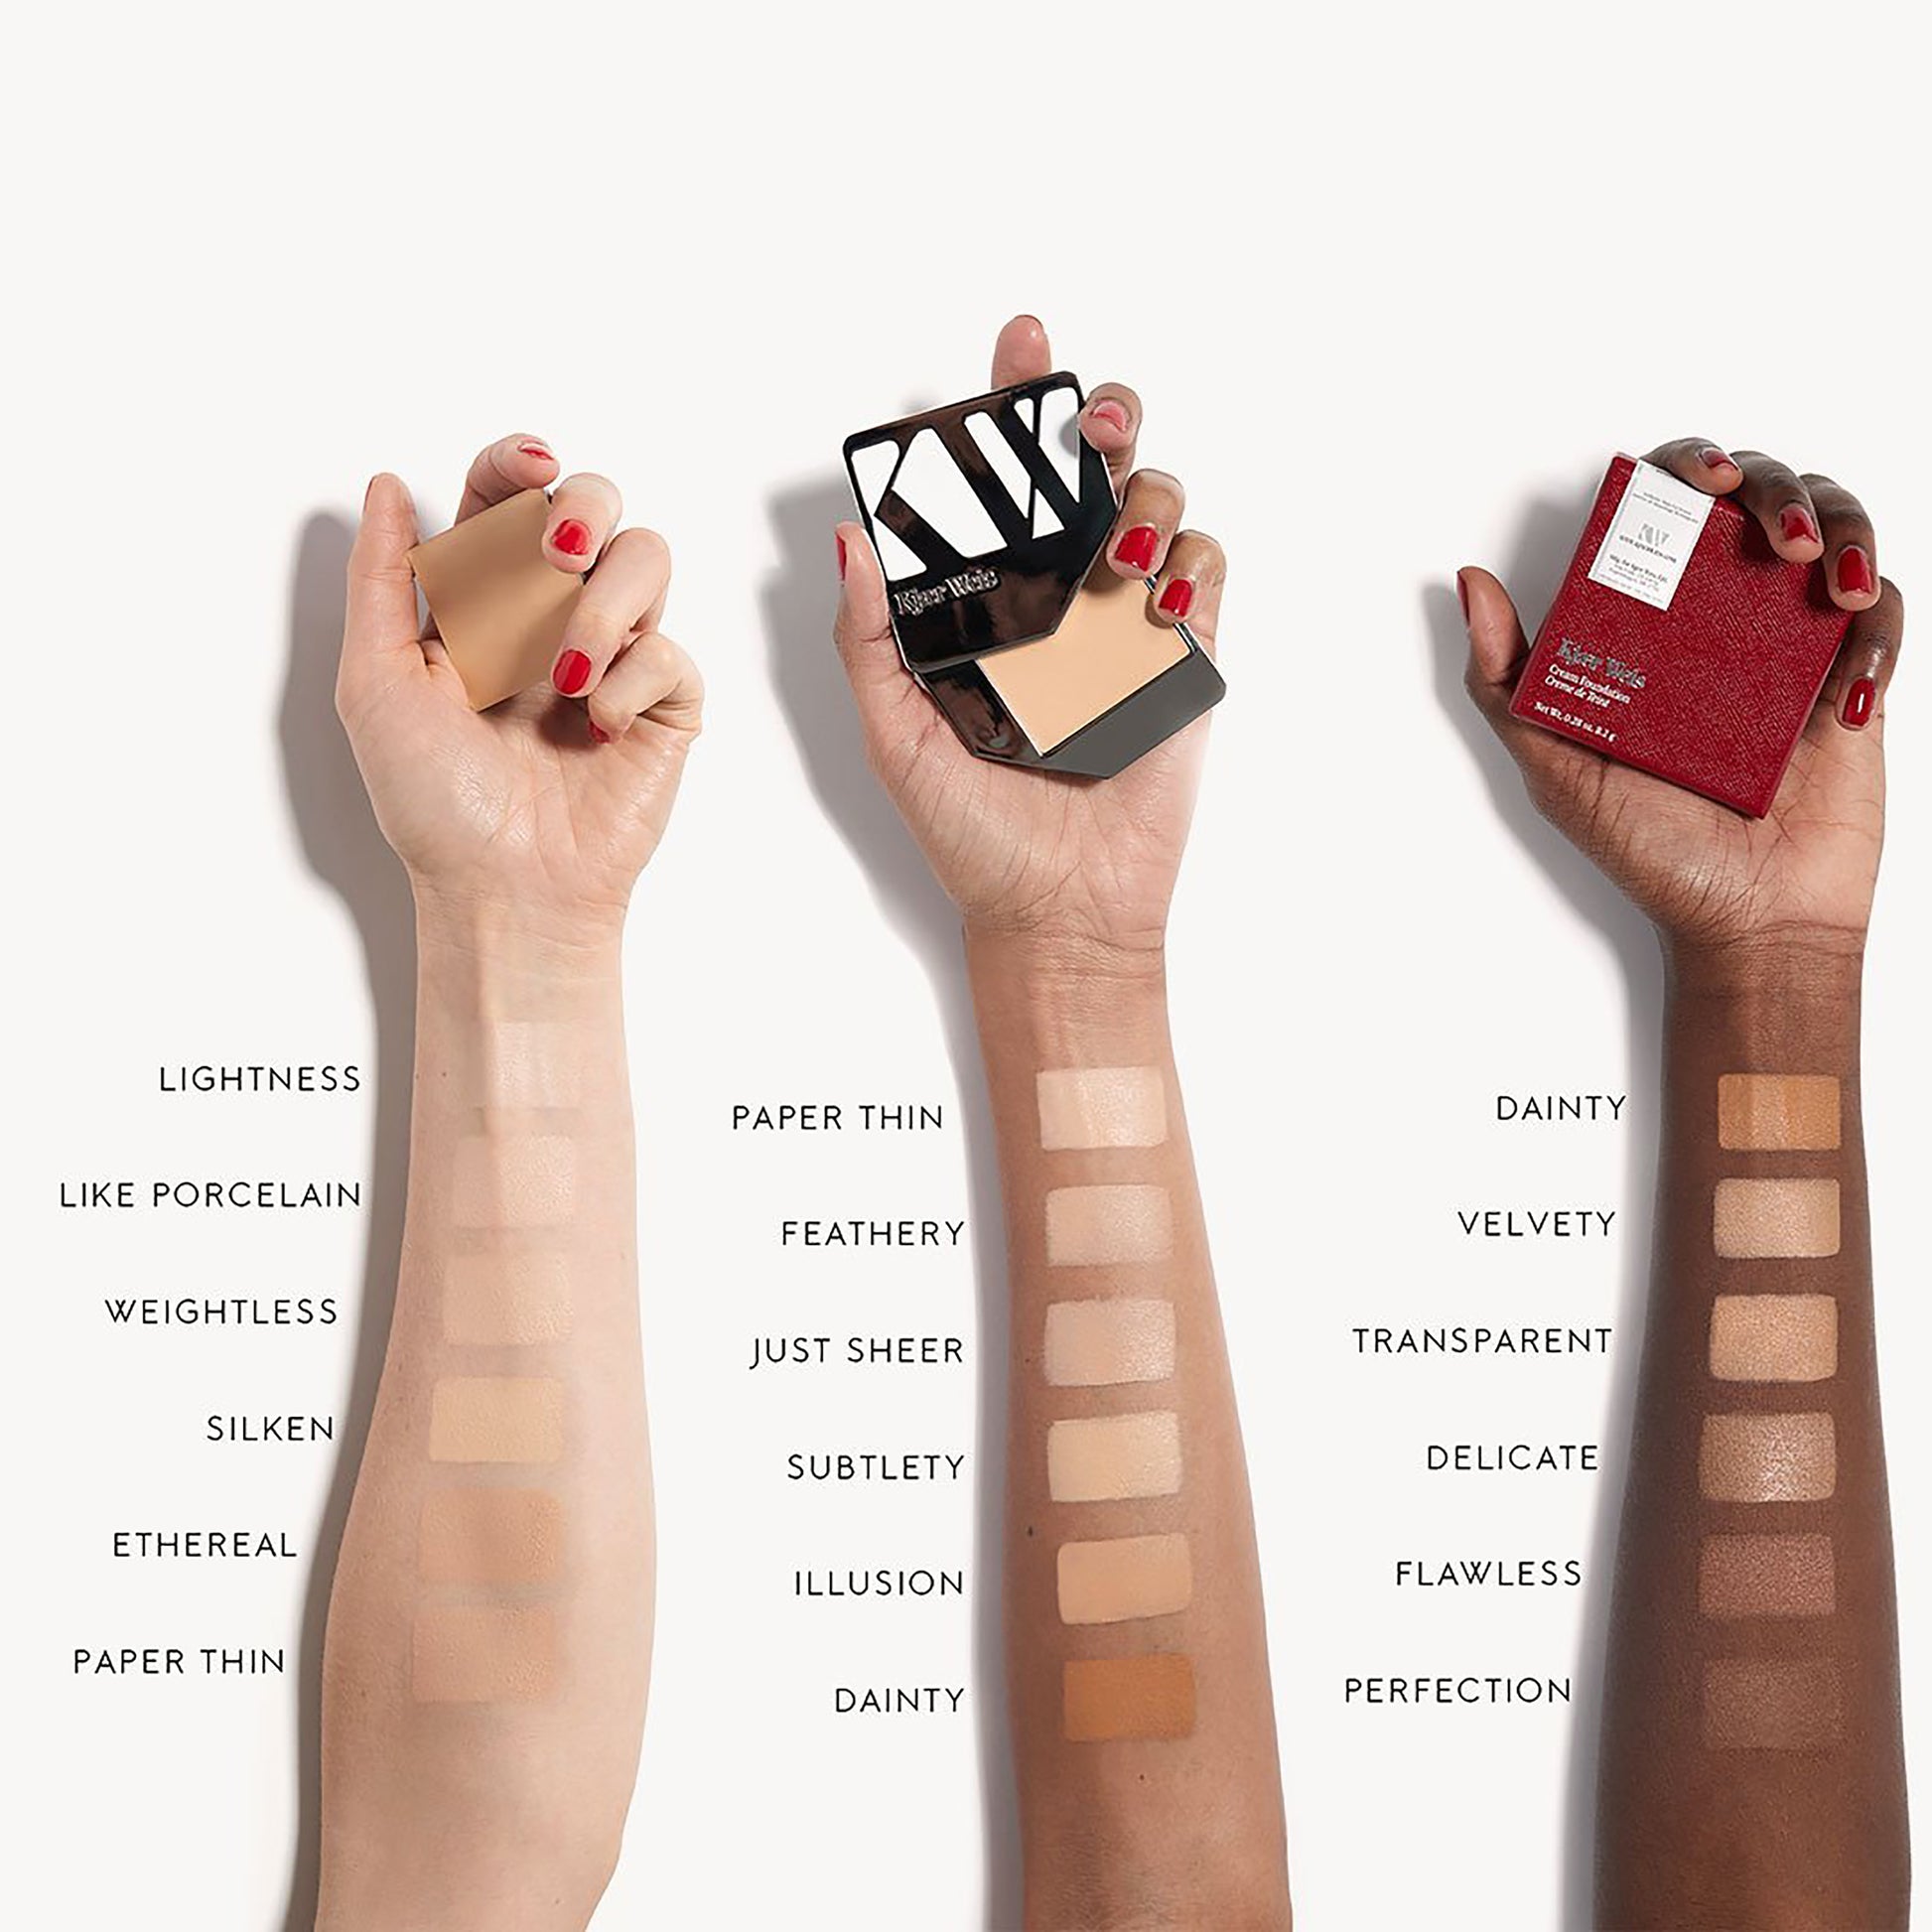 Three arms of three different skin tones all with a swatch of cream foundation from darkest to lightest shade. Subtlety is the third-darkest shade on the medium skin tone.  